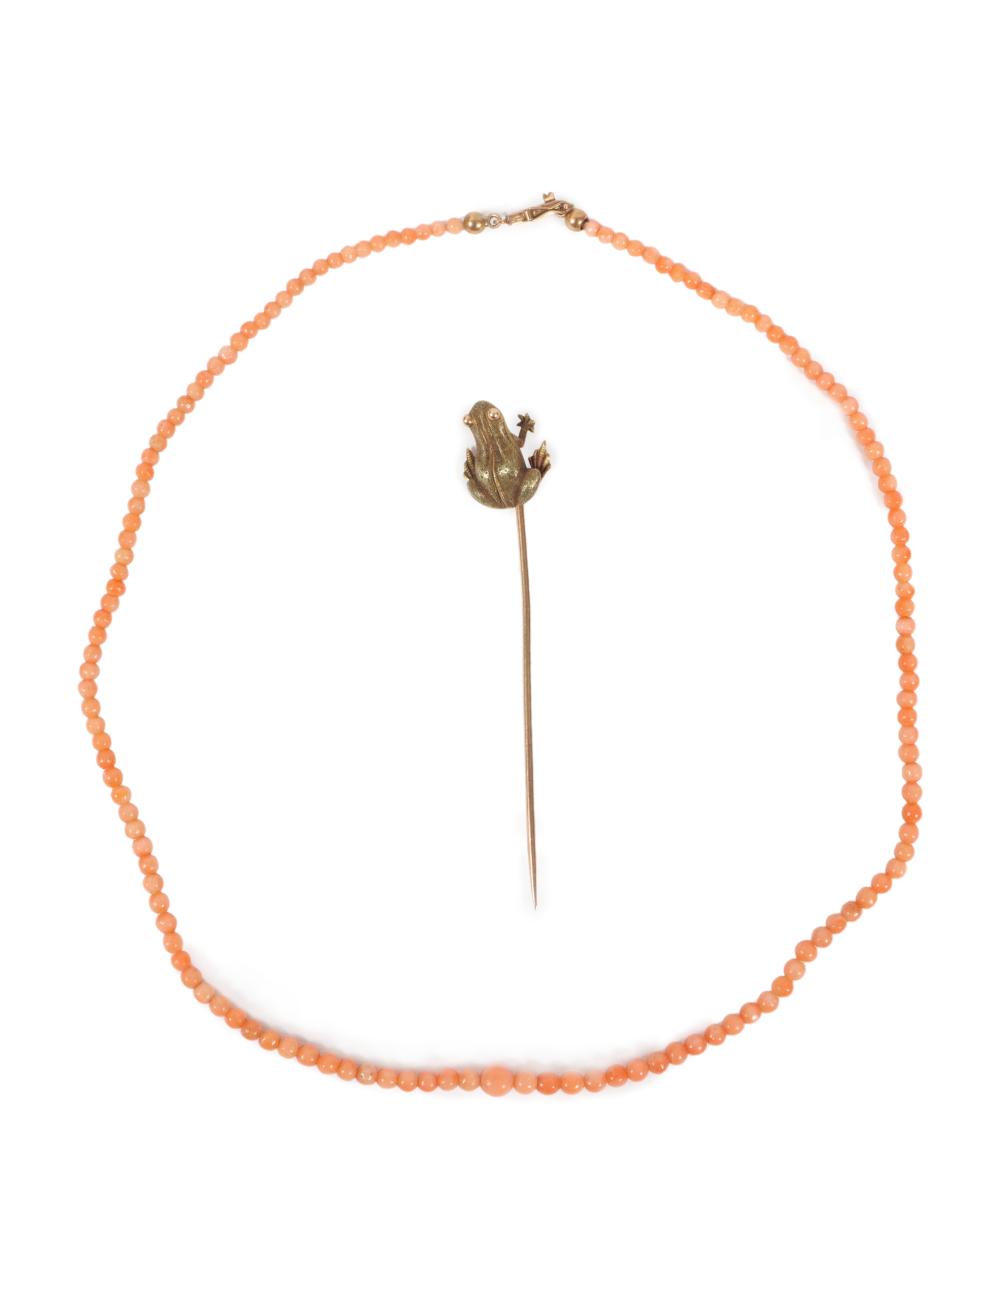 CORAL SEED BEAD NECKLACE WITH 12CT